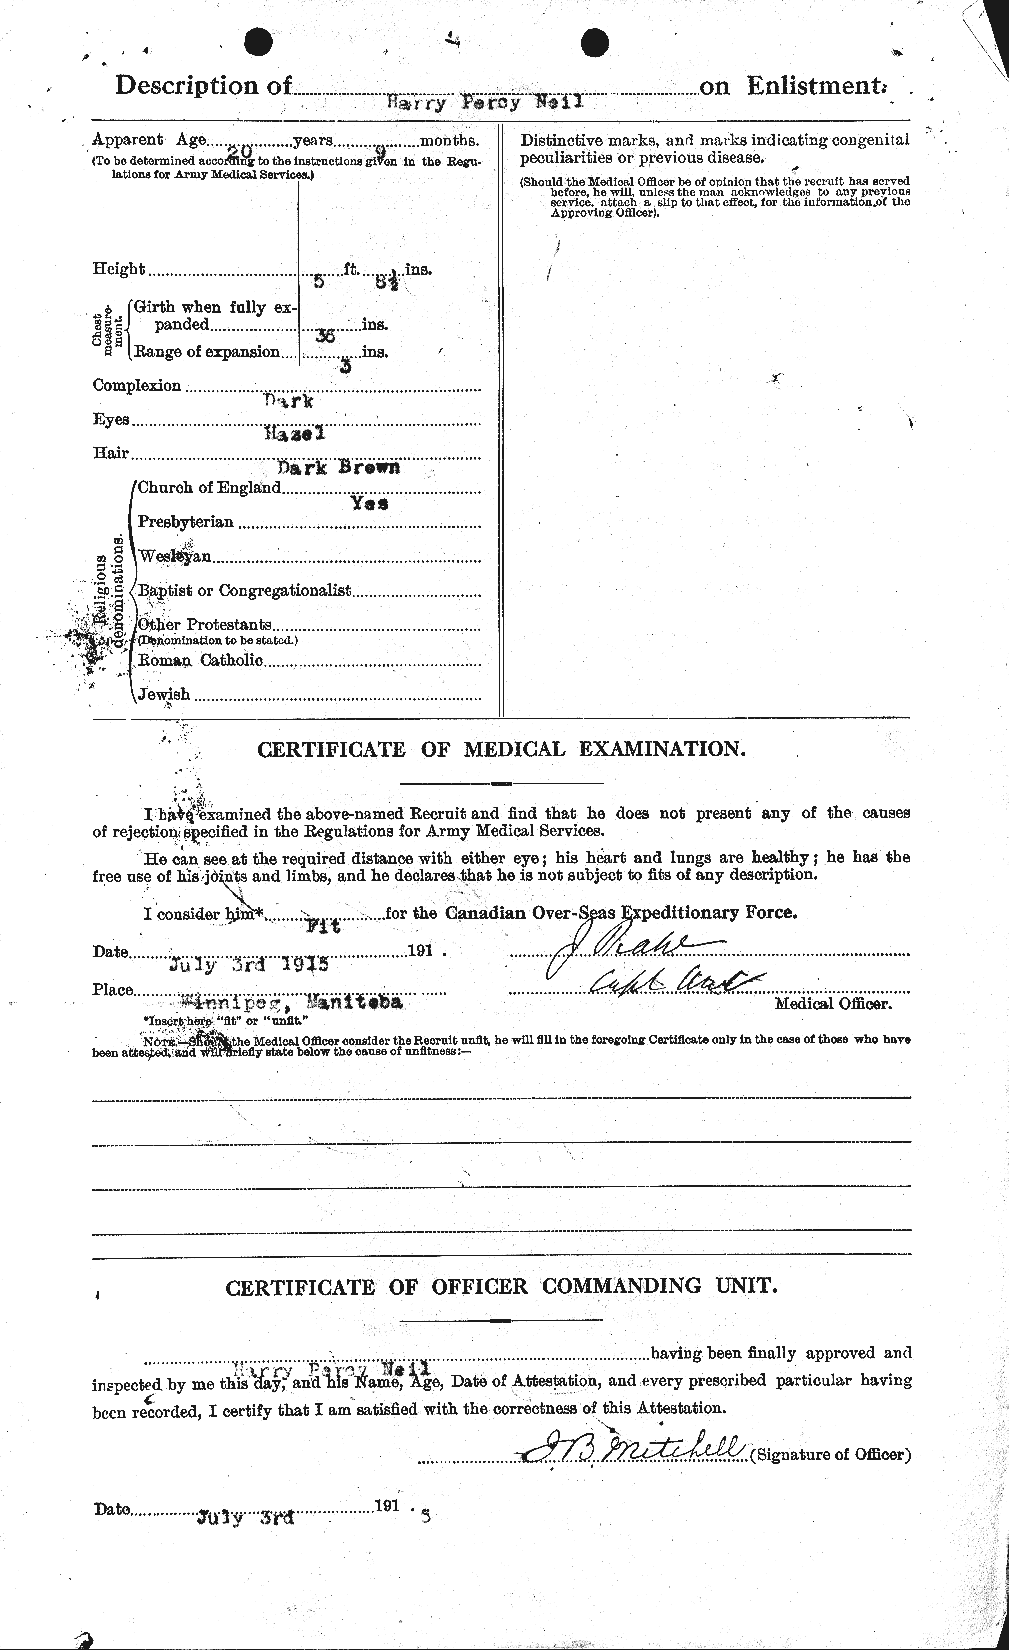 Personnel Records of the First World War - CEF 545584b